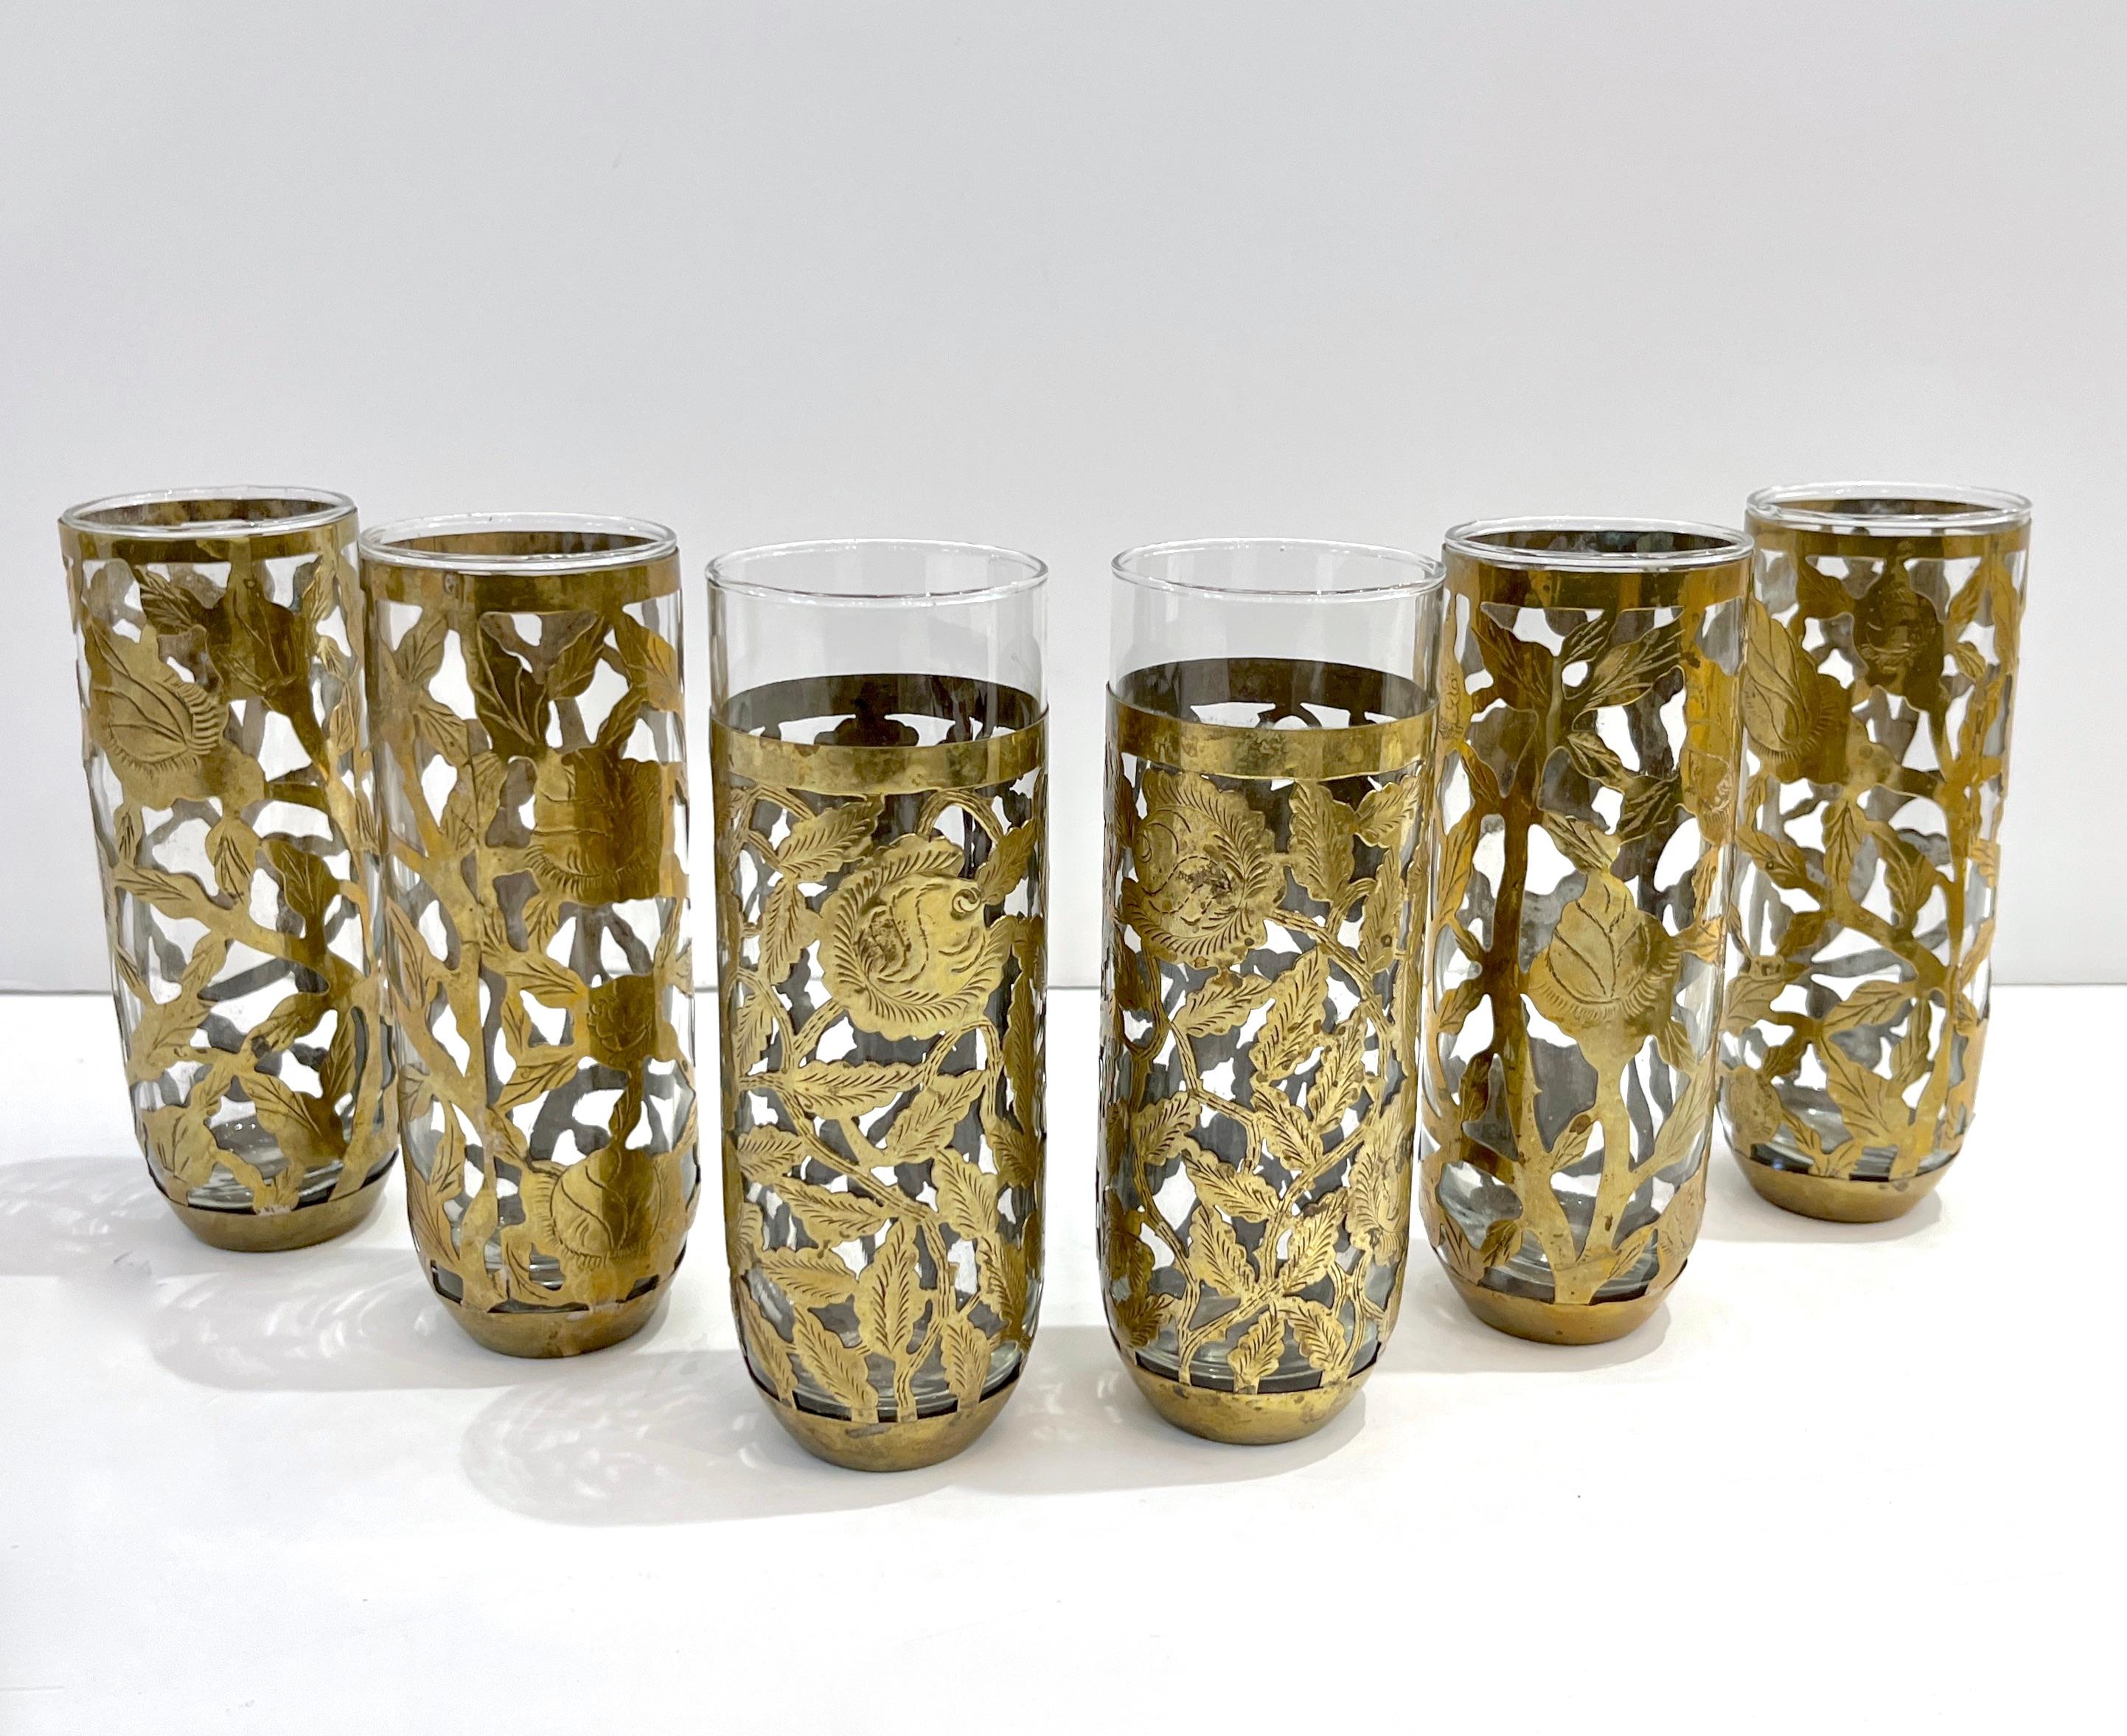 1960 Mexican Set 4 Drinking Glasses Encased in Etched Cutwork Floral Brass Decor For Sale 3